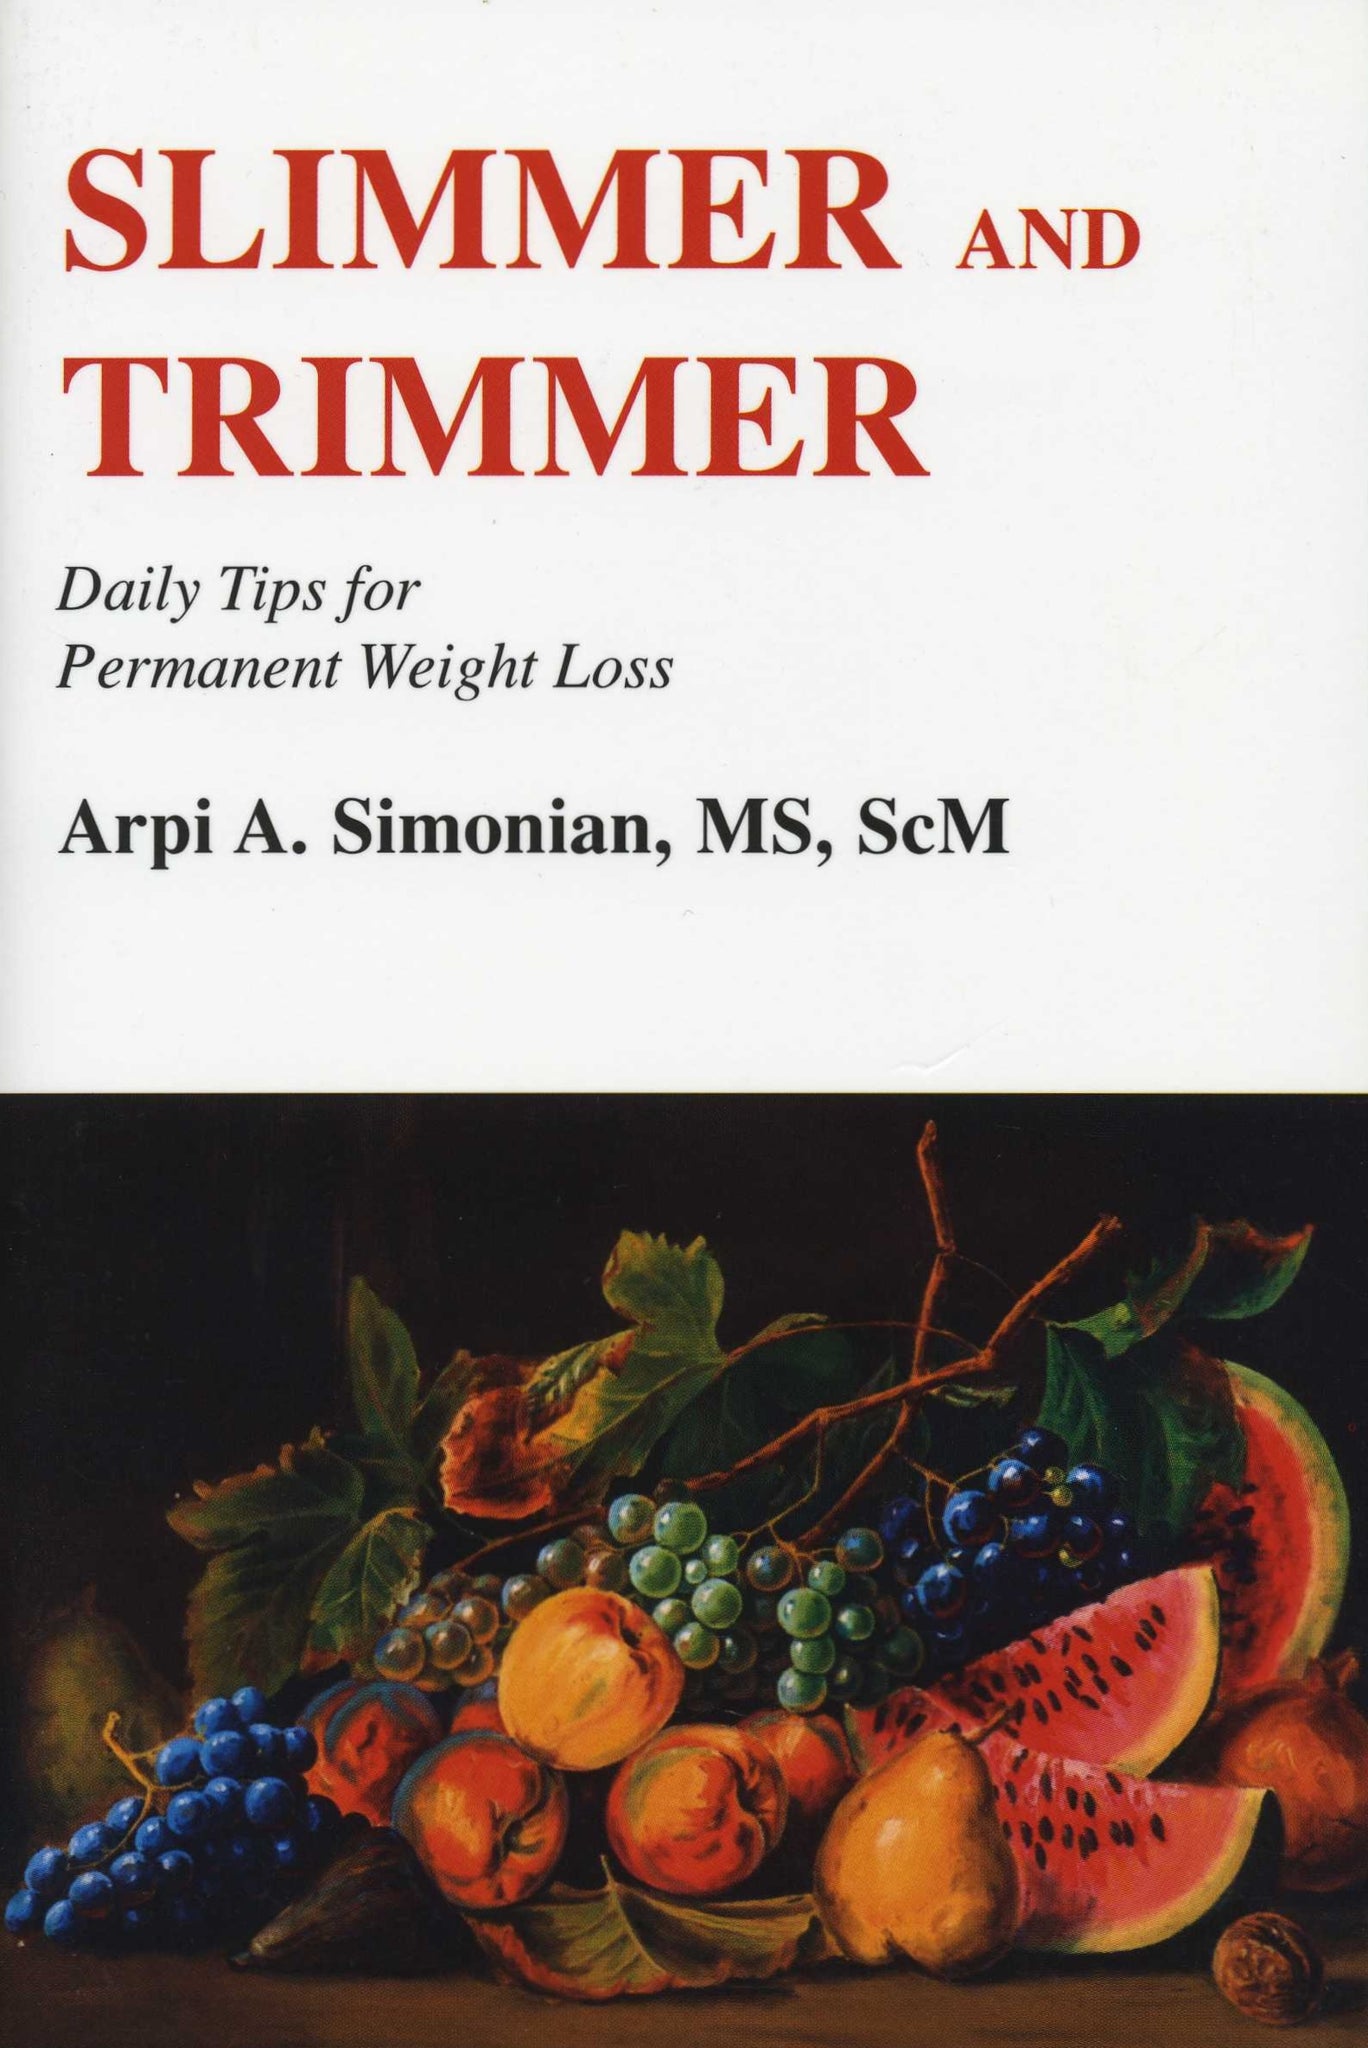 SLIMMER AND TRIMMER: Daily Tips for Permanent Weight Loss